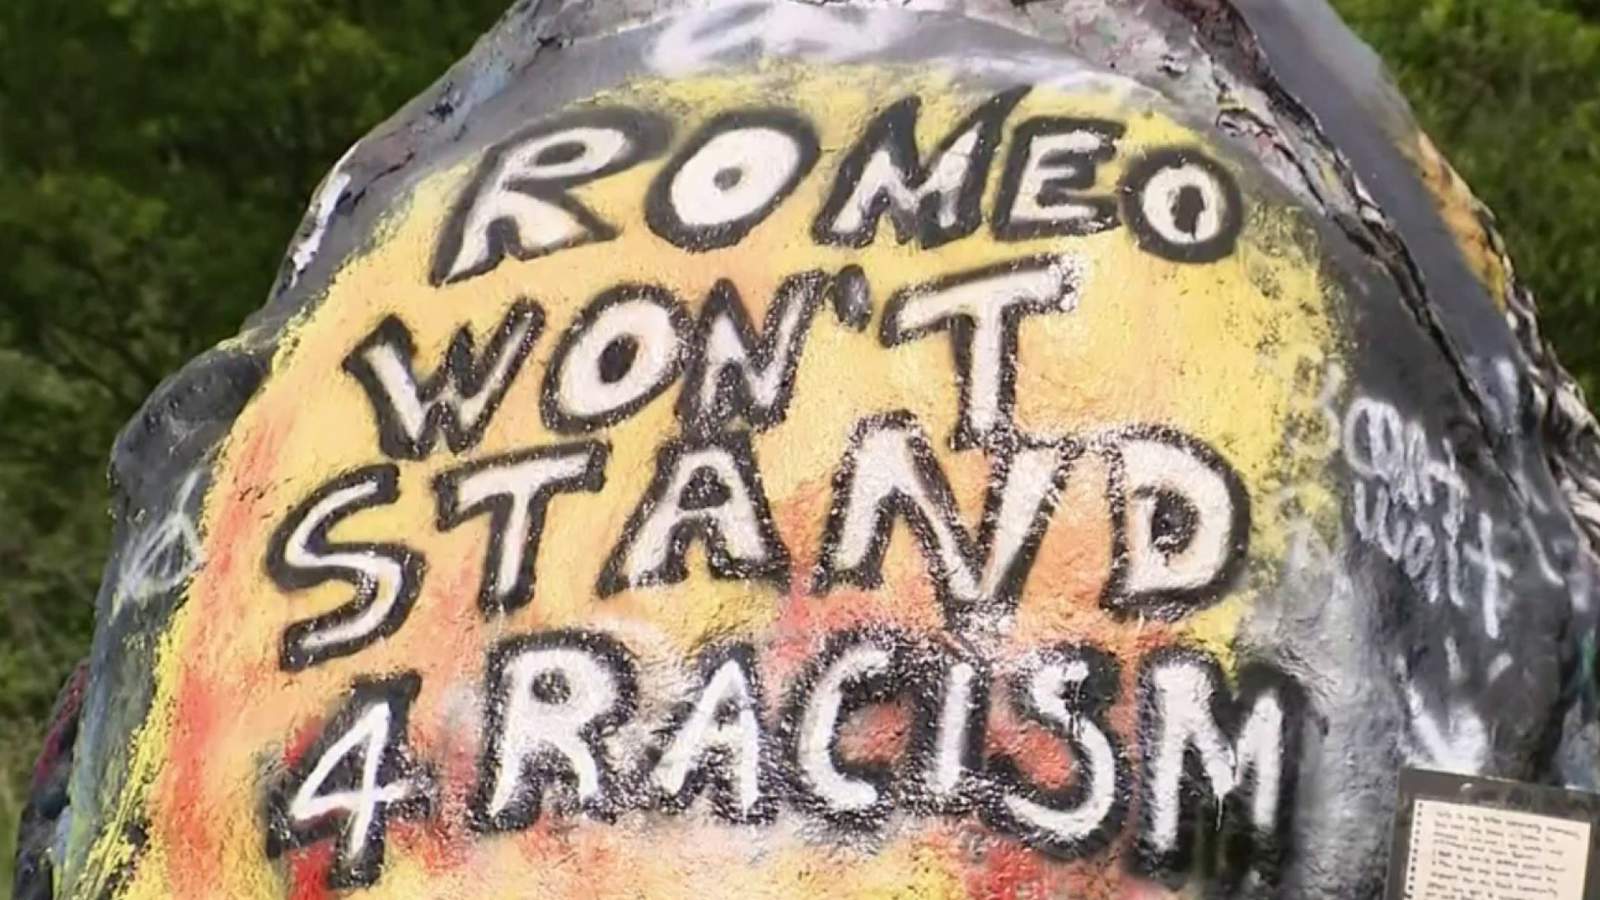 Future of ‘Romeo Rock’ uncertain after ‘Black Lives Matter’ message replaced with racial slur